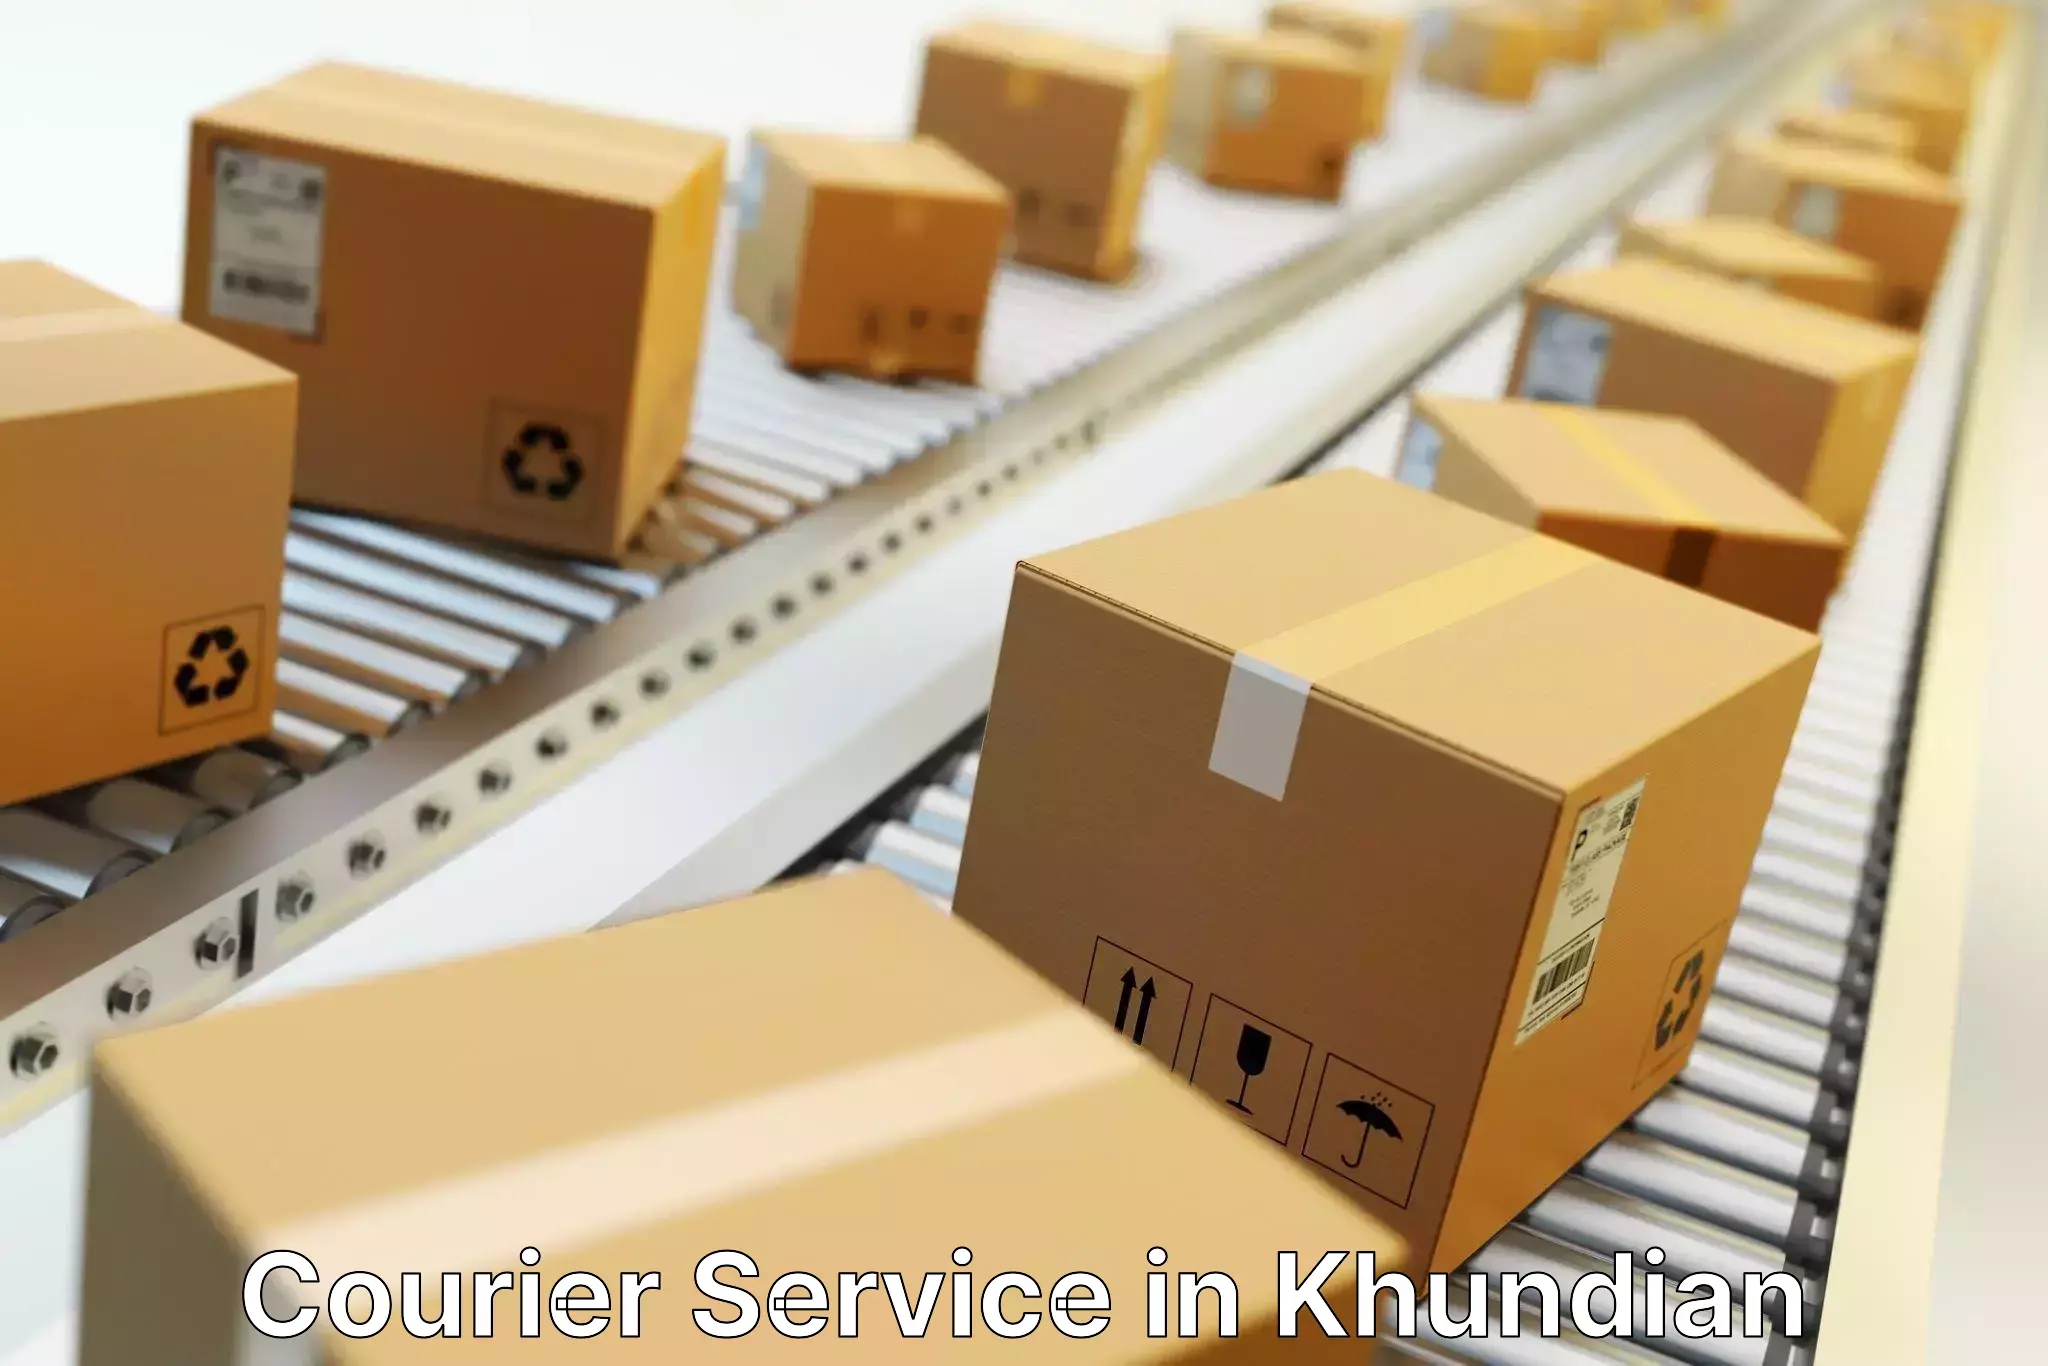 Cargo delivery service in Khundian